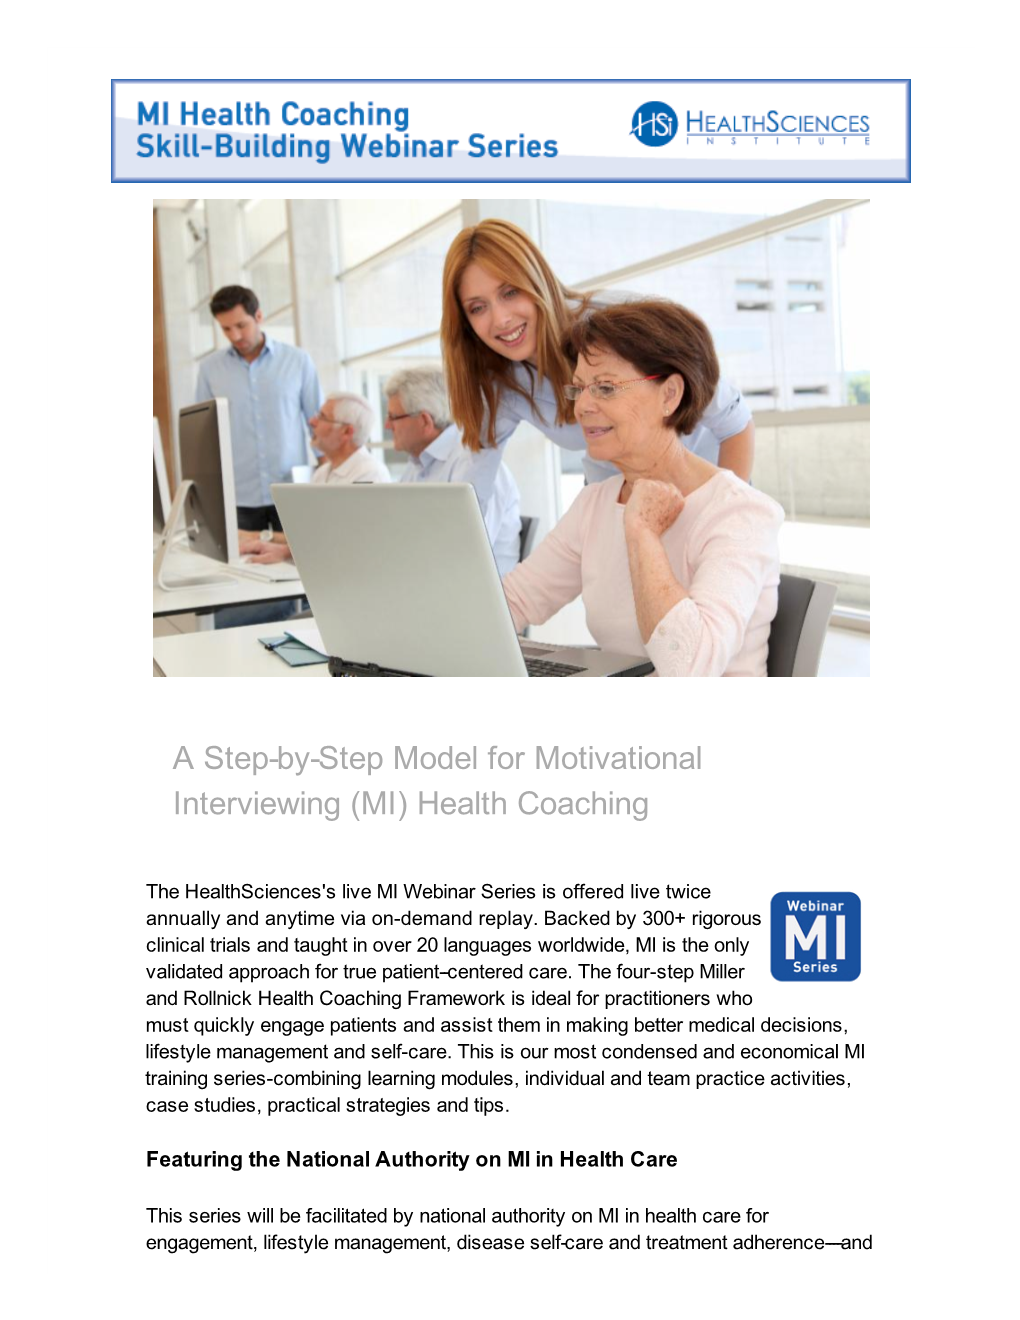 A Step-By-Step Model for Motivational Interviewing (MI) Health Coaching